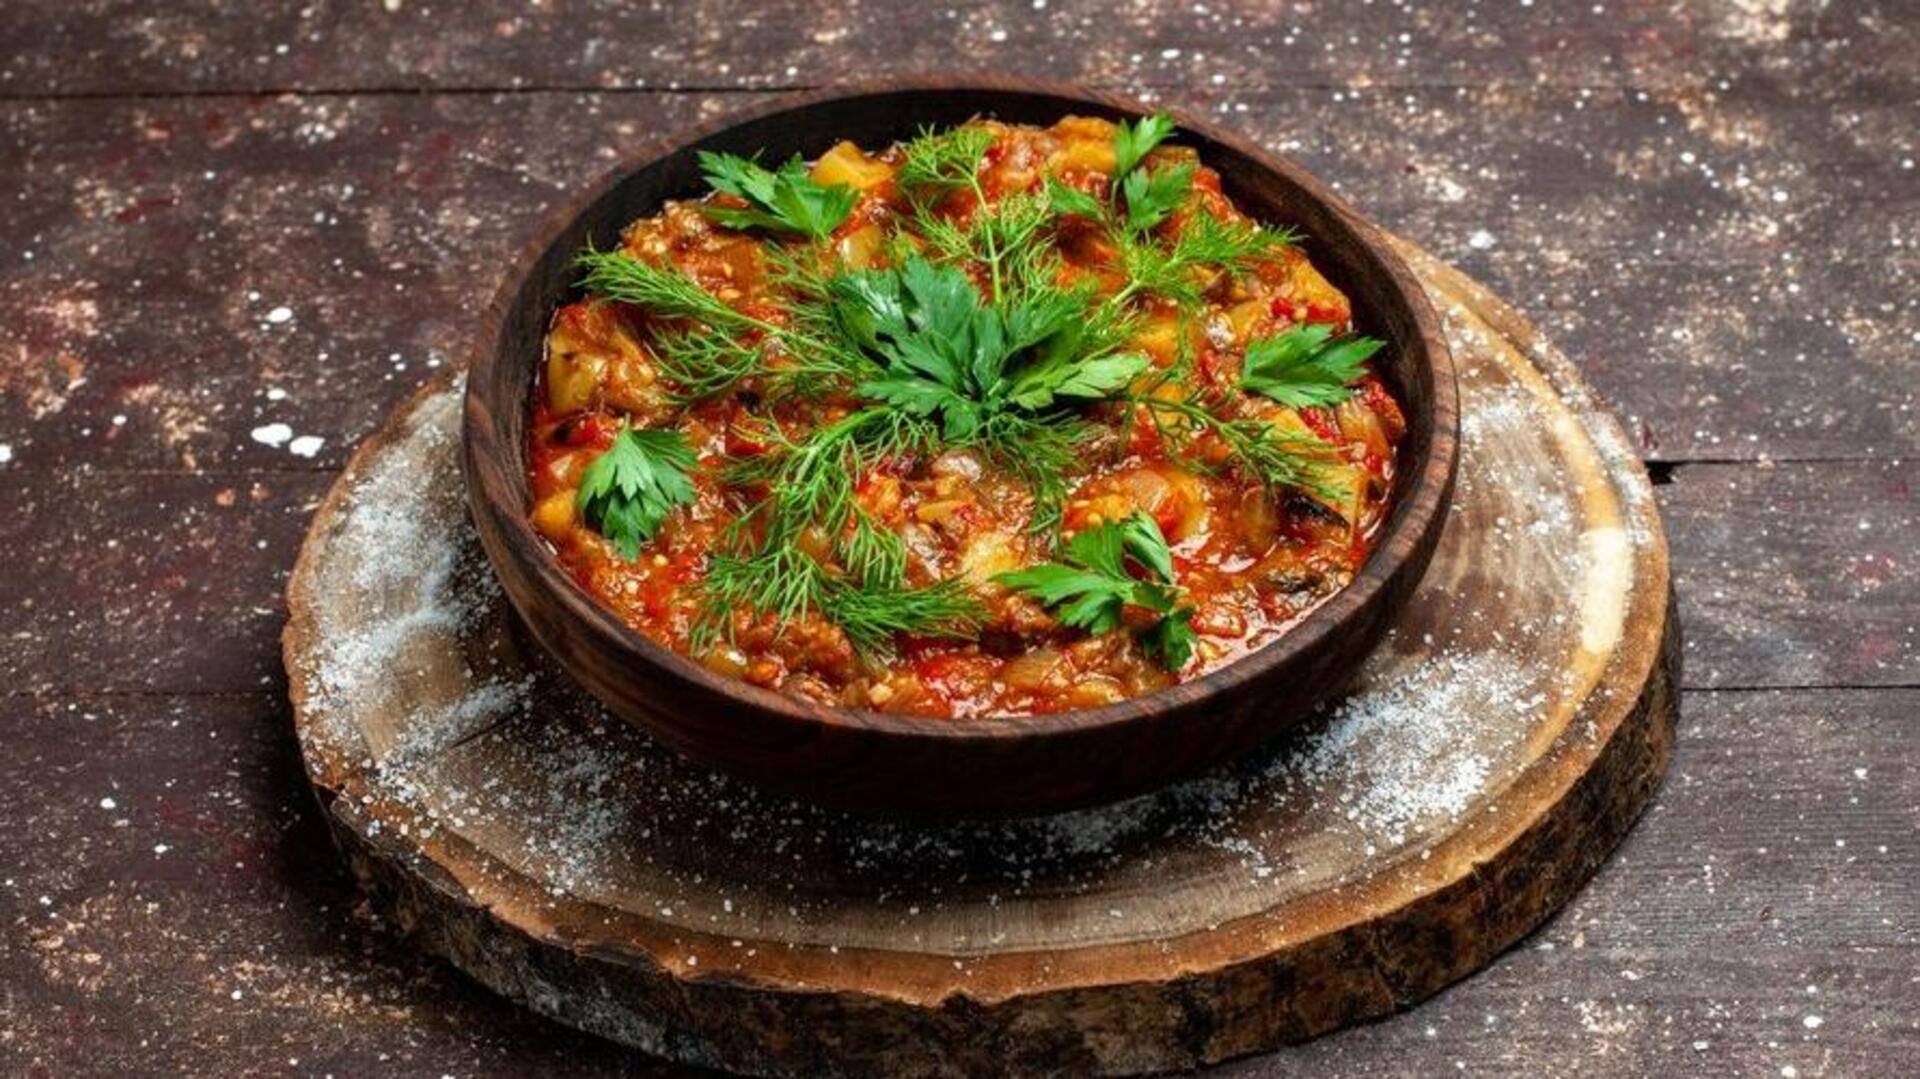 Calling all vegans! Try this lentil moussaka recipe today